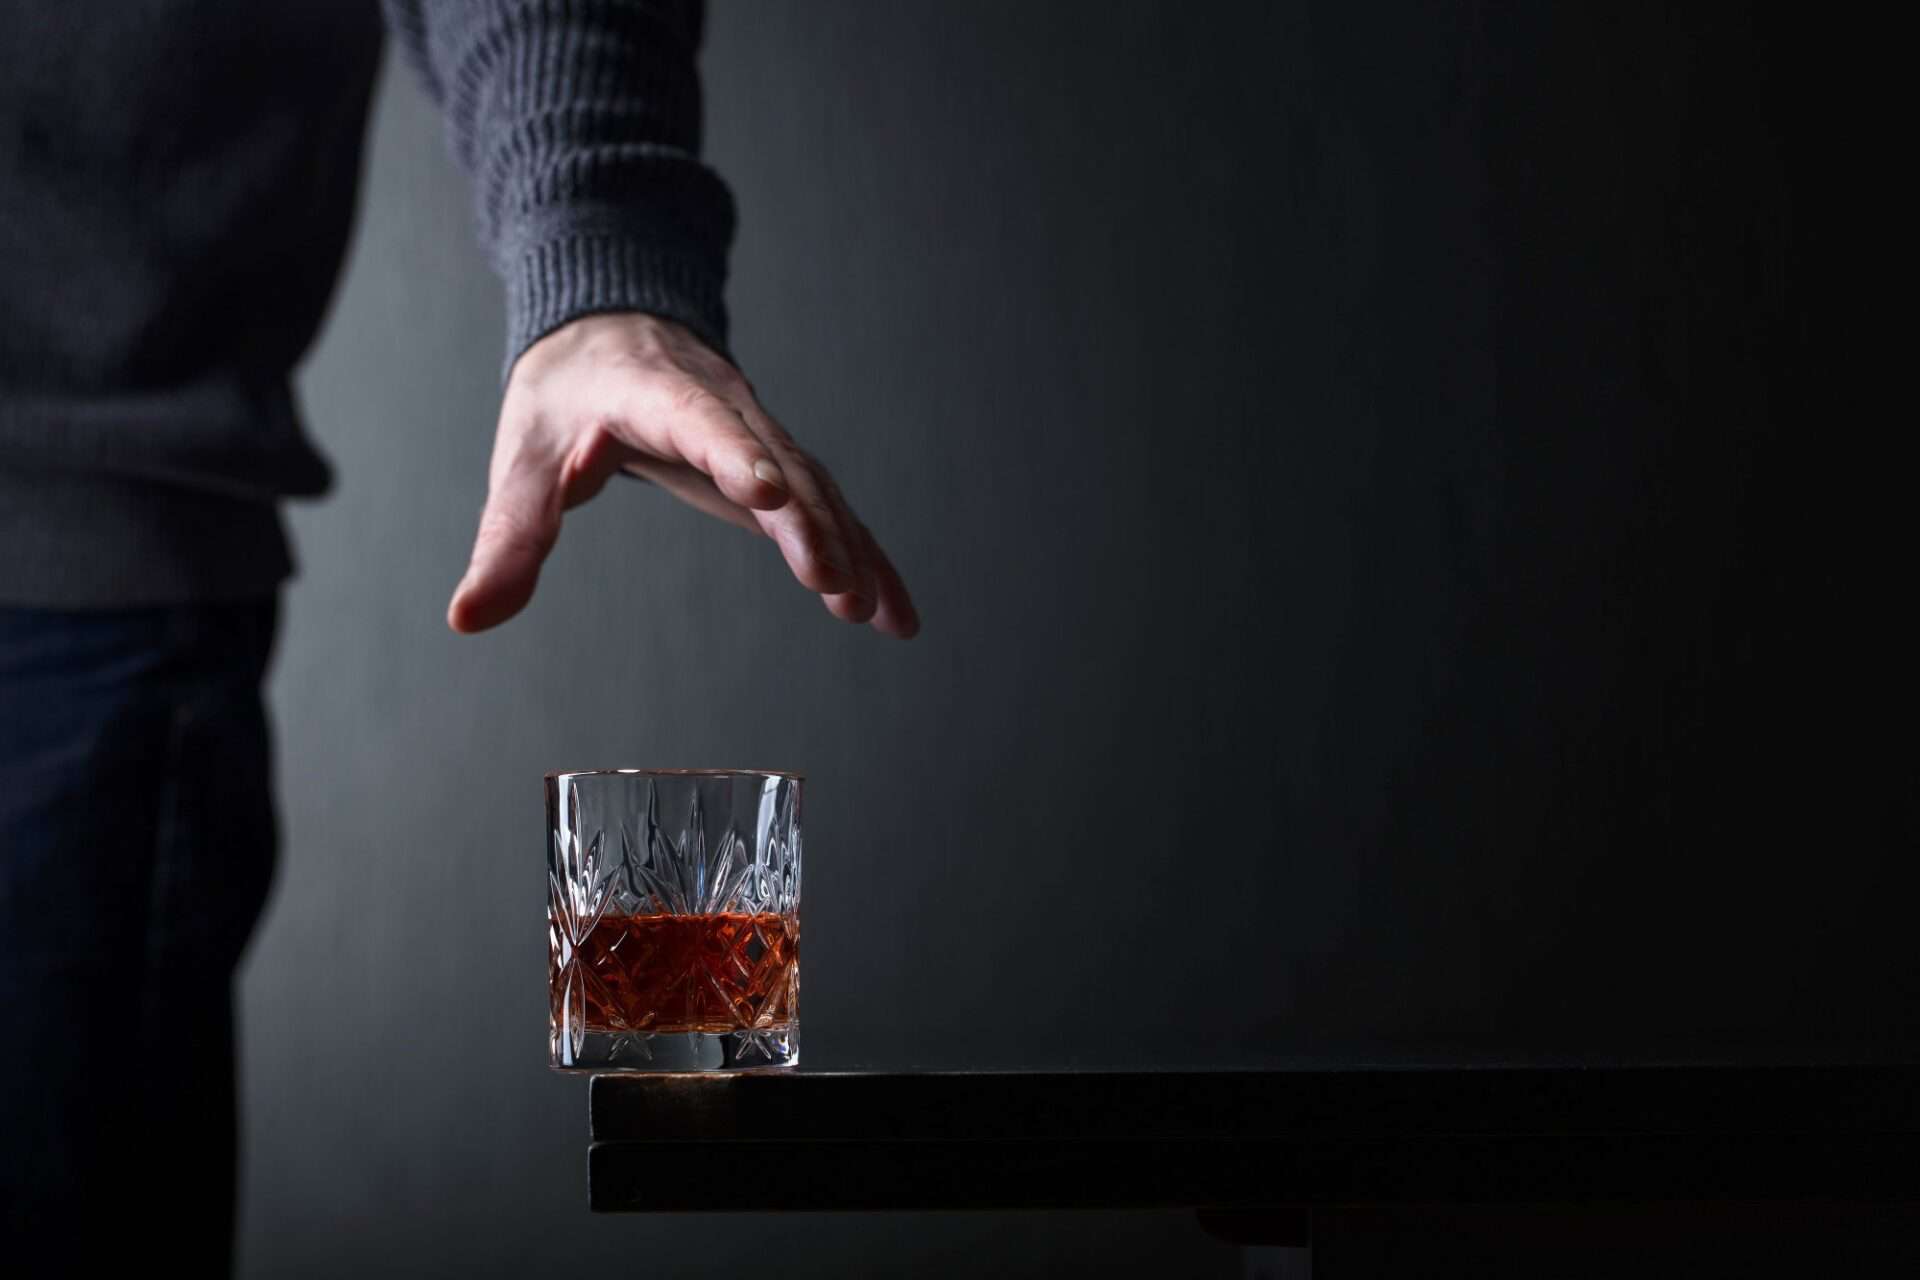 Can an Alcoholic Ever Drink Again? 5 Things to Know